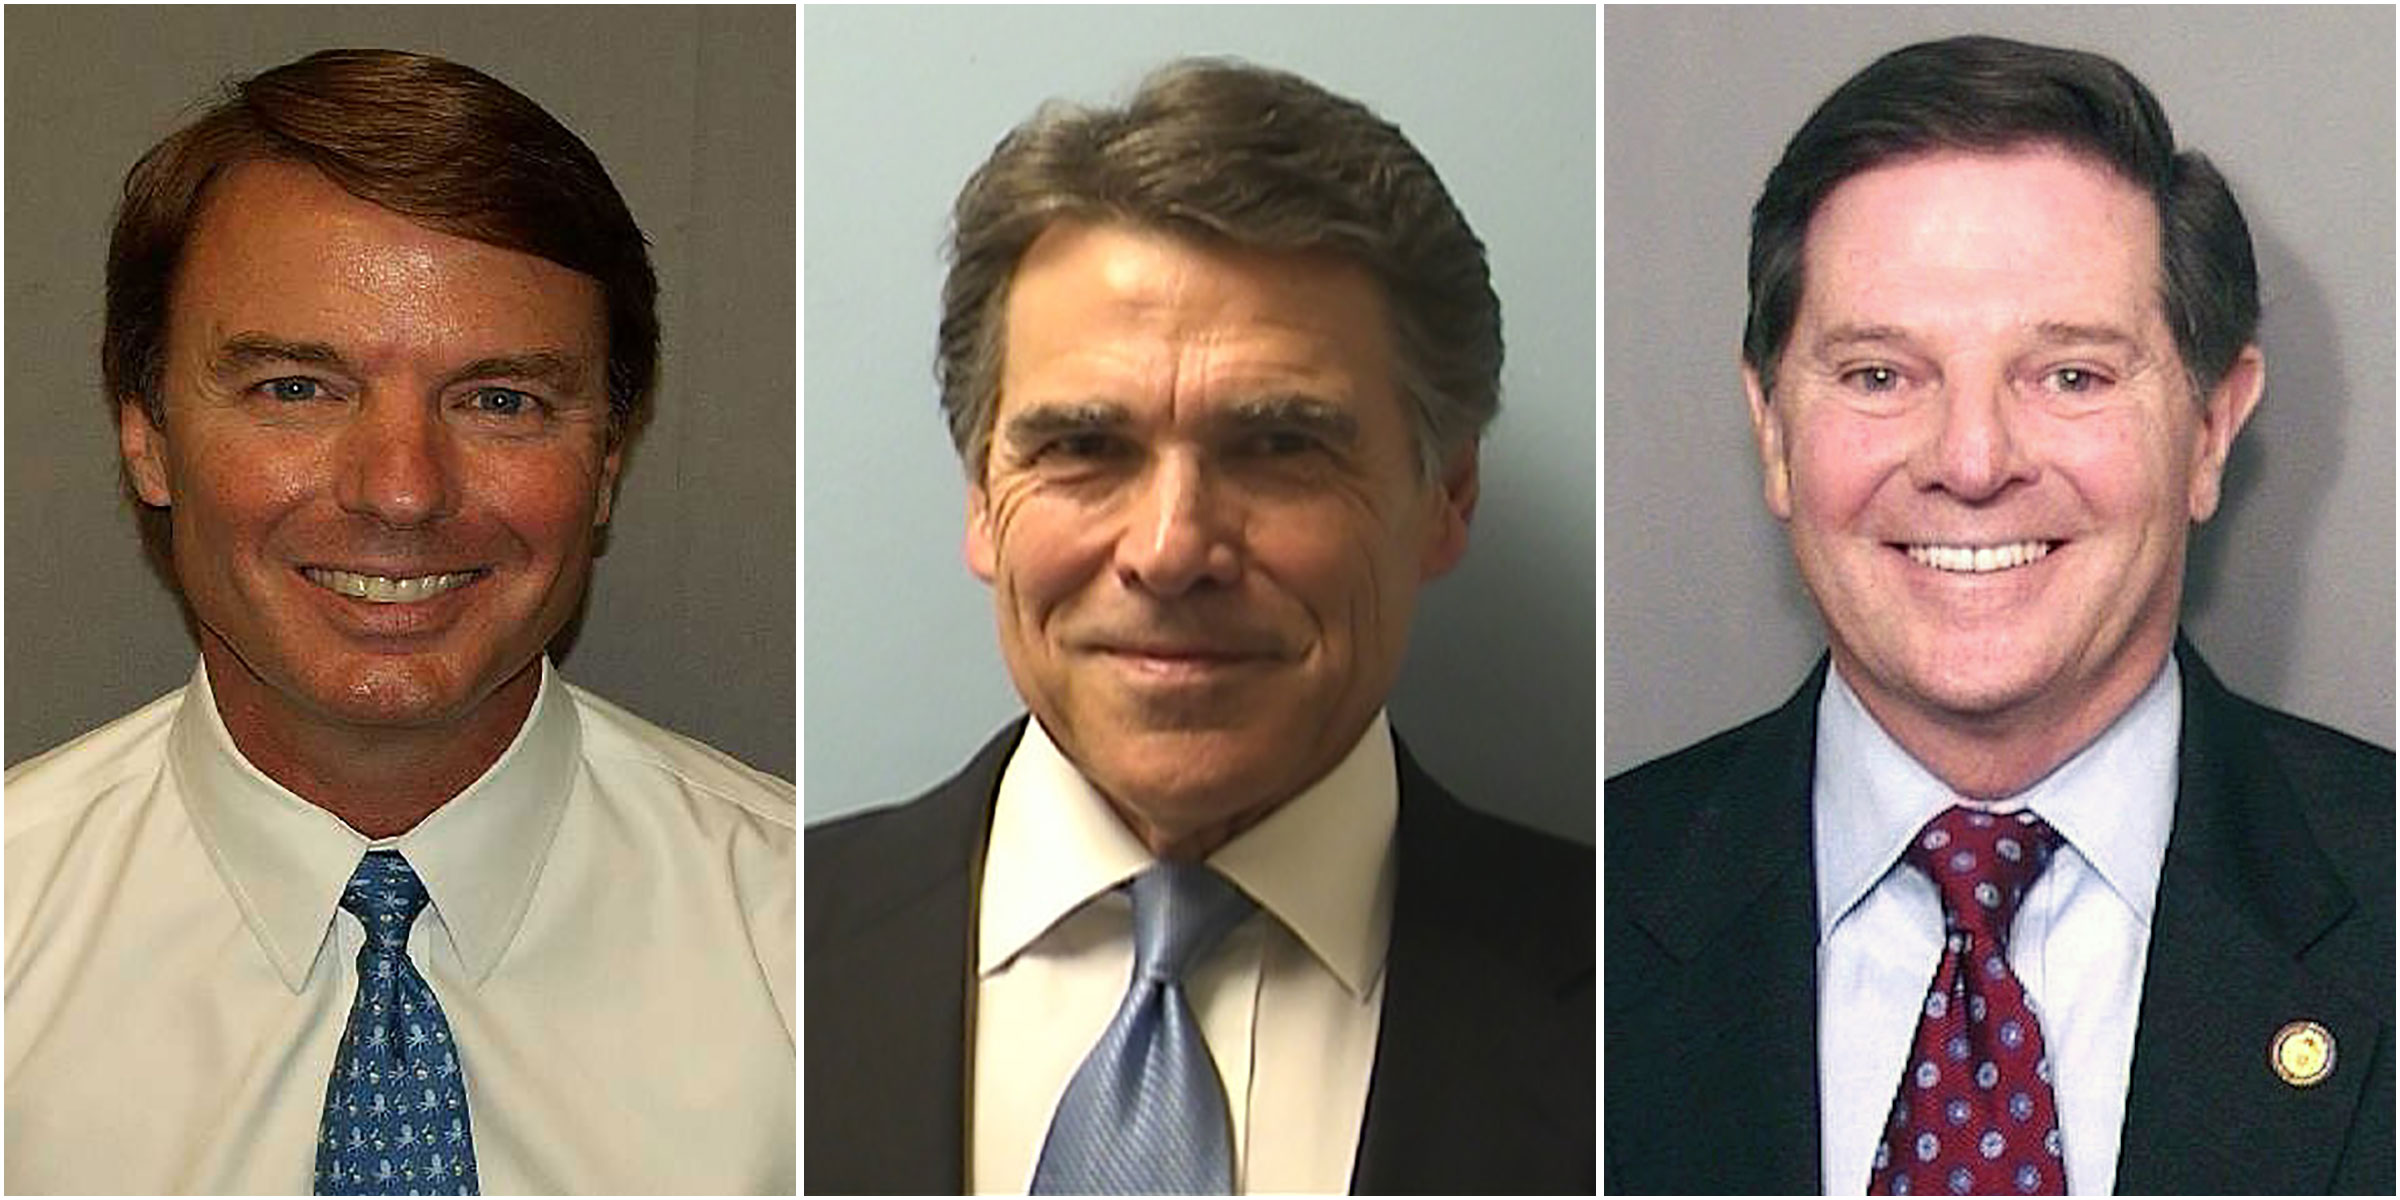 Mug shots of John Edwards, Rick Perry, and Tom DeLay. (U.S Marshal’s Service/Abaca Press/Reuters; Travis County Sheriff’s Office/Getty Images; Getty Images)